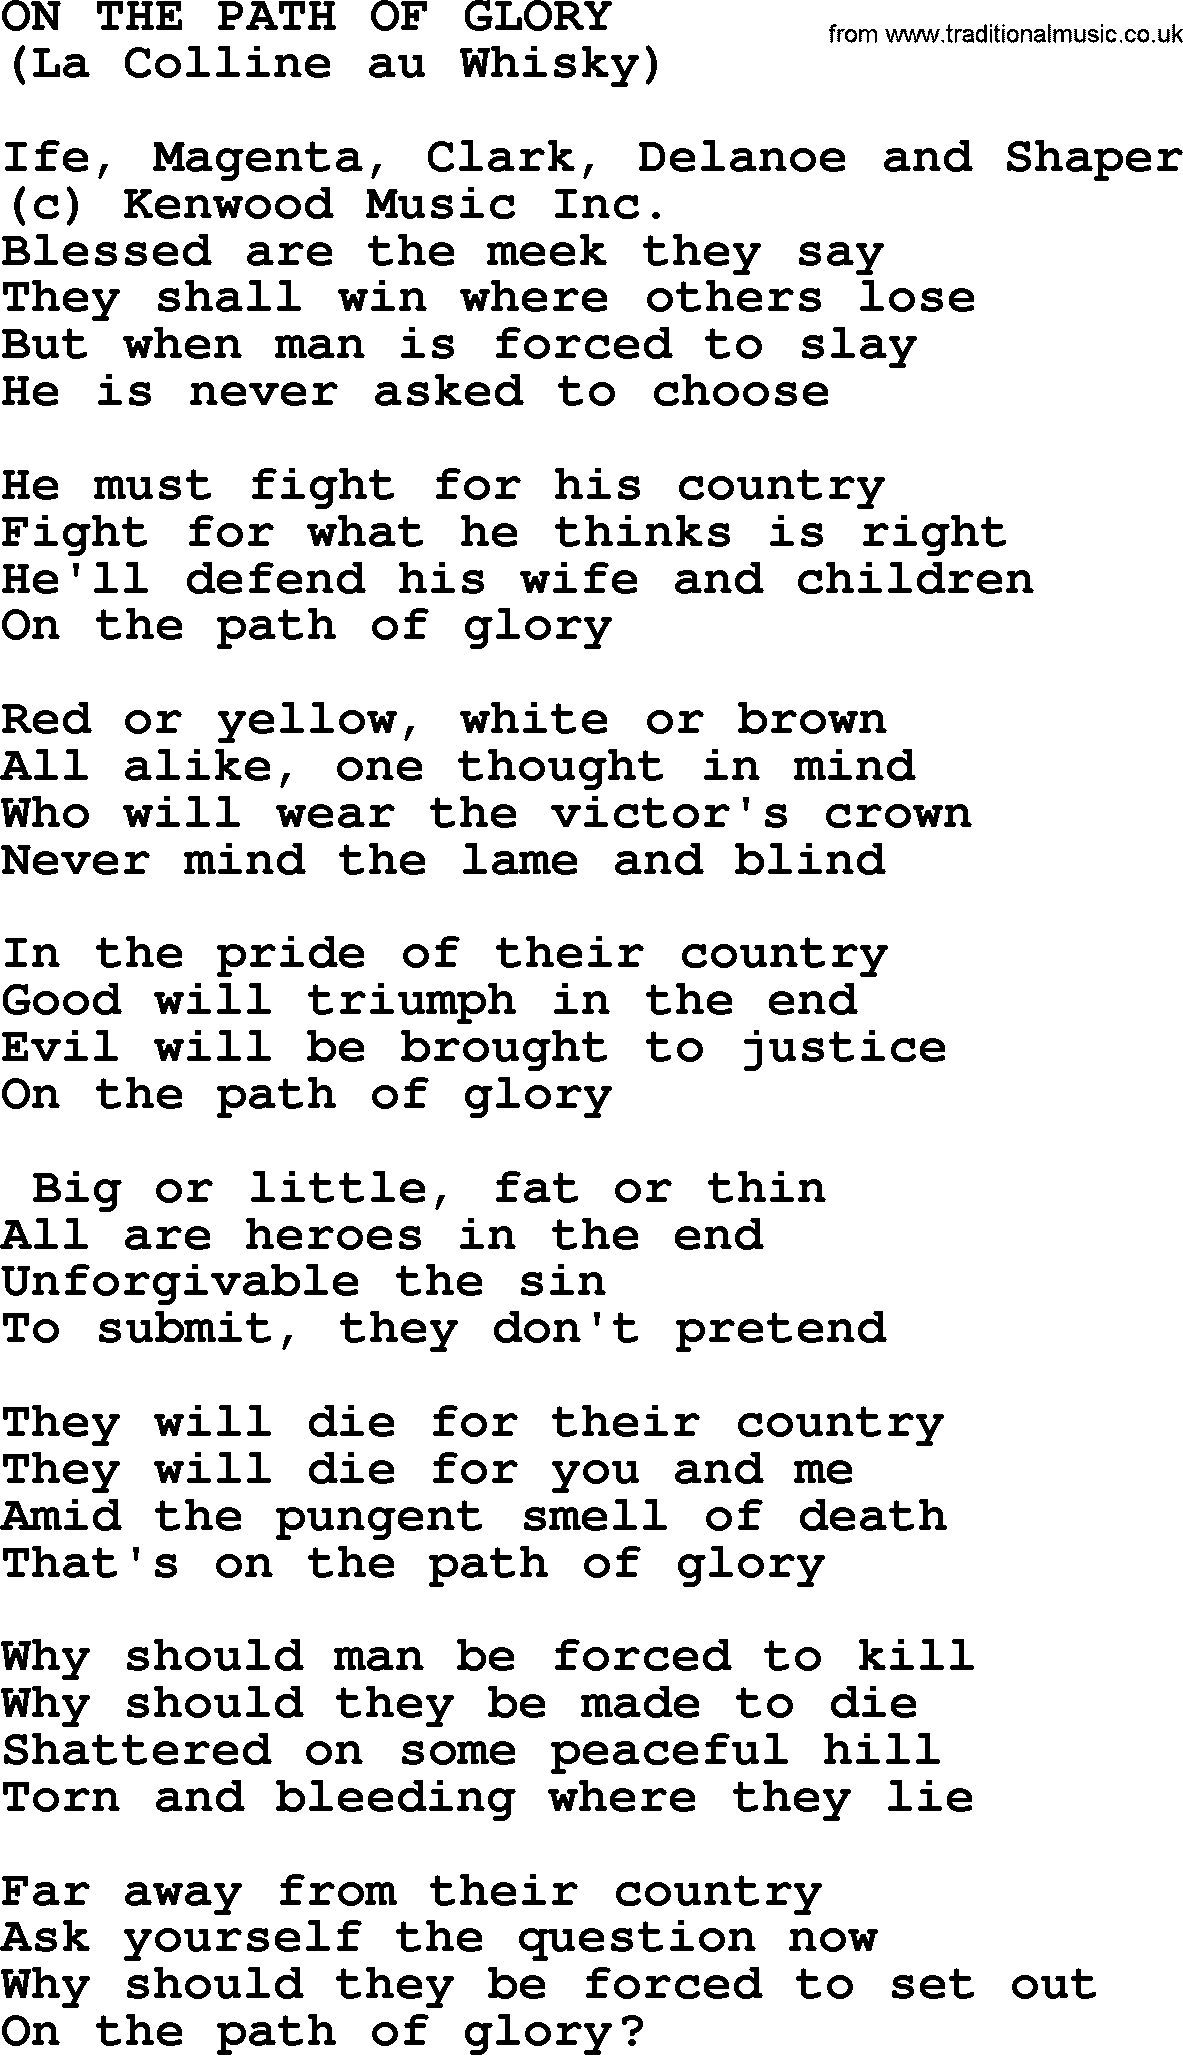 Peter, Paul and Mary song On The Path Of Glory lyrics